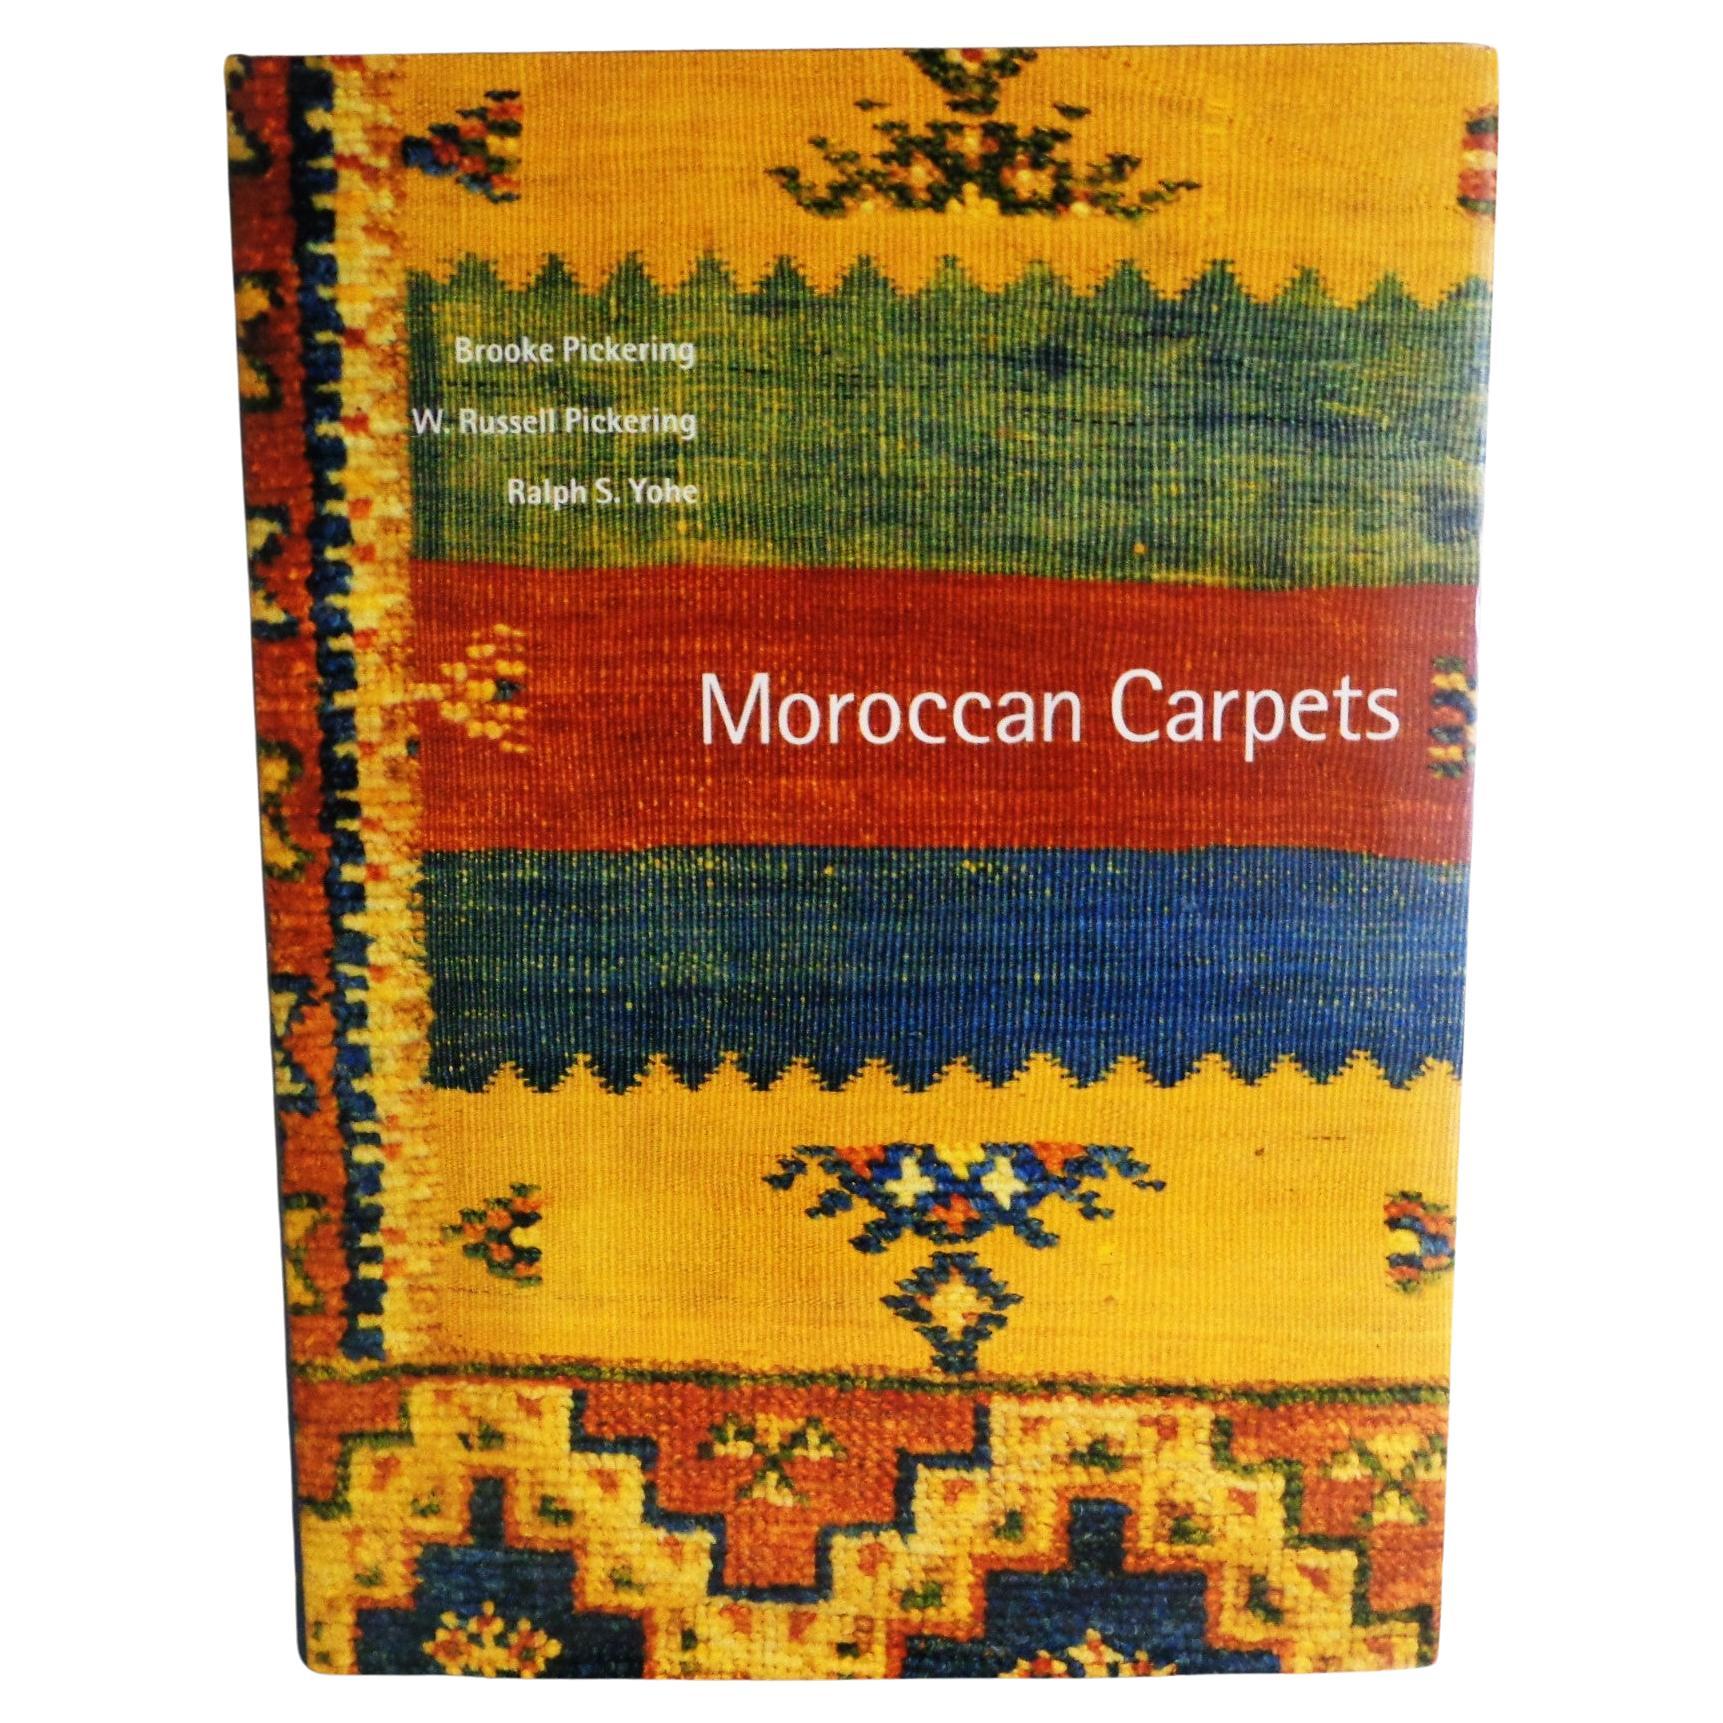  Moroccan Carpets: Pickering, Pickering, Yohe - Laurence King Hali Publications For Sale 13